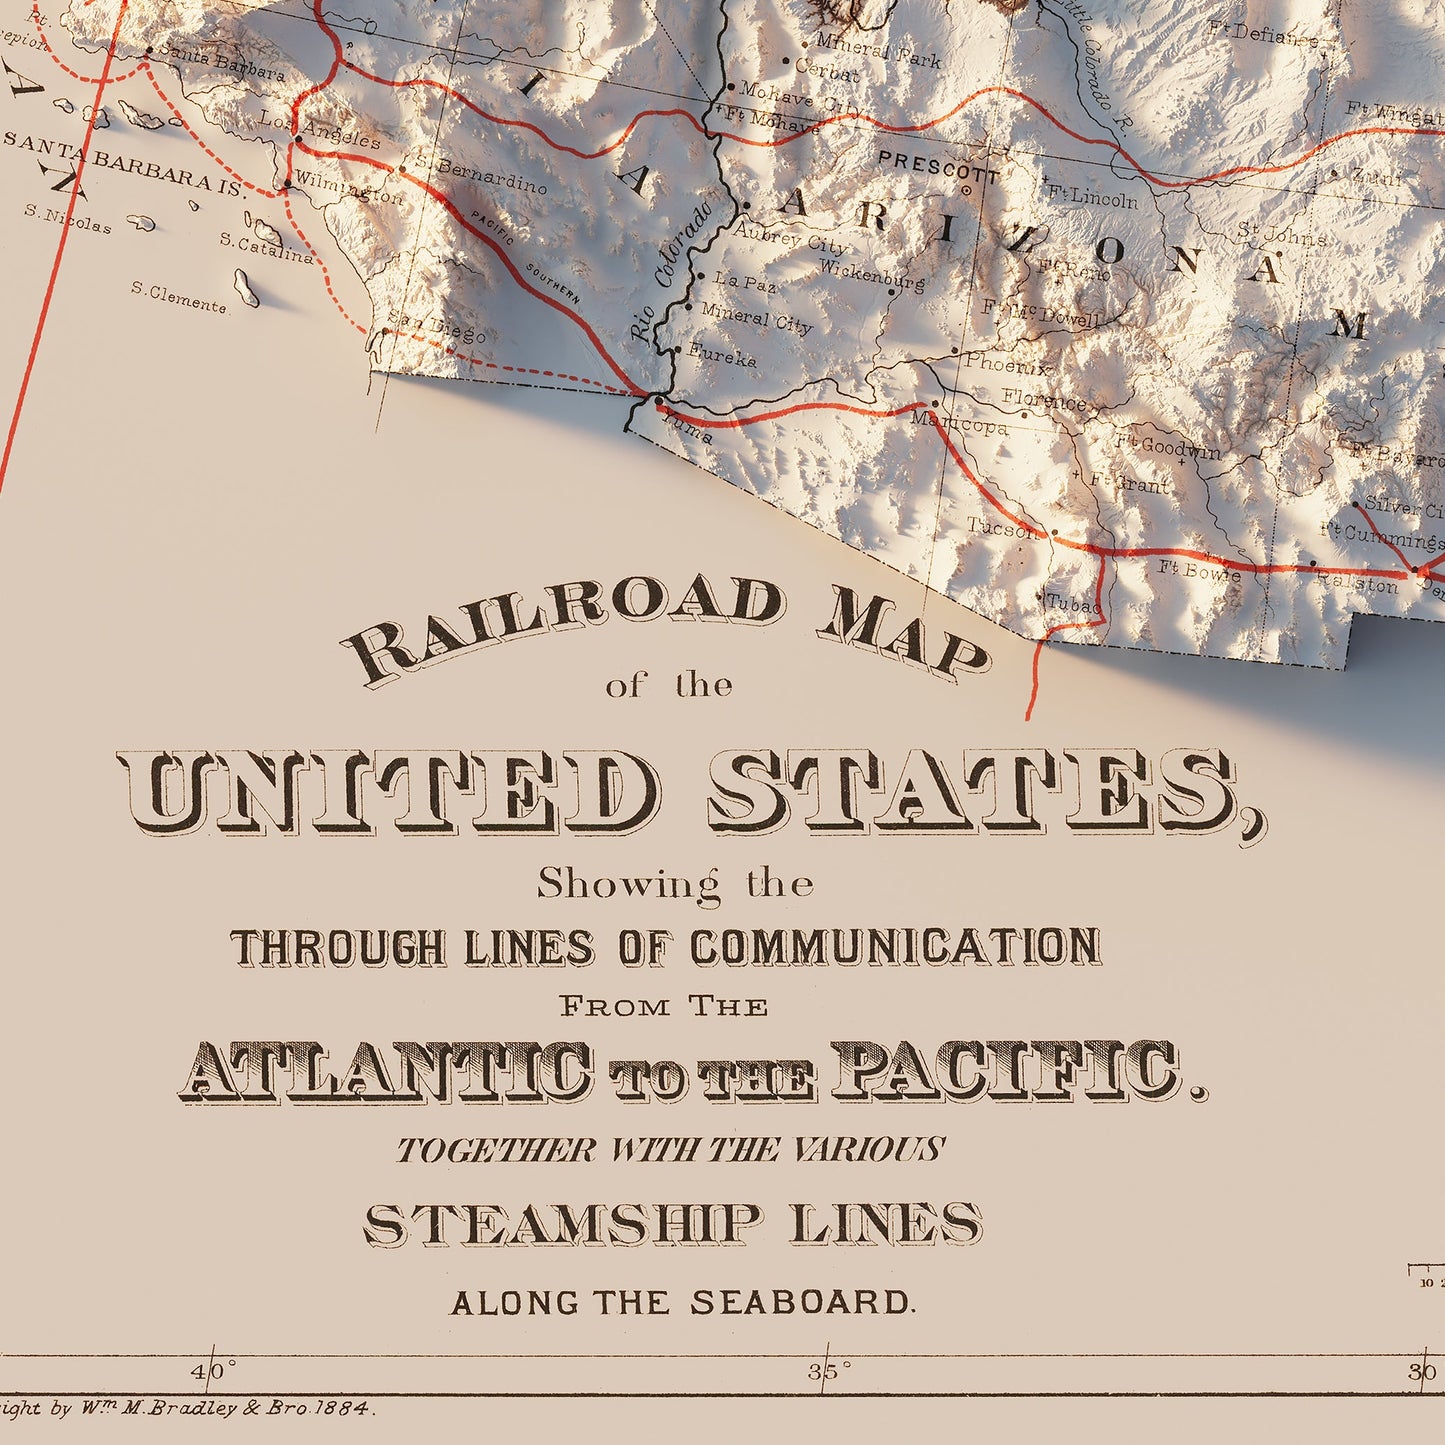 USA Railroad 1884 Shaded Relief Map